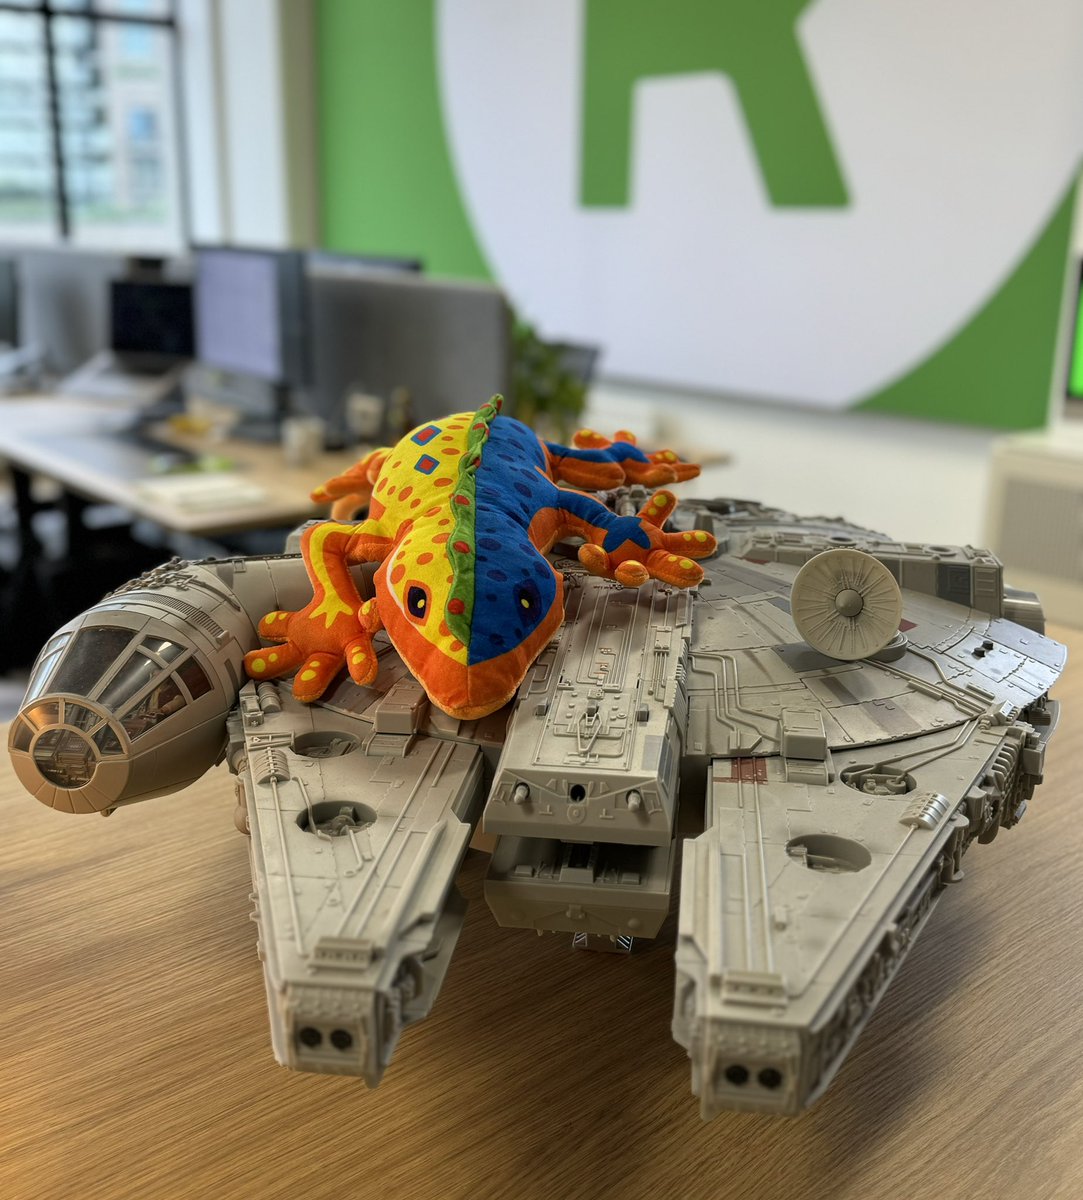 We're thrilled to host #Mercè, the traveling mascot of #DrupalConEur in #Barcelona, @react_online until @Drupaljam on June 12th. 

It looks like she shares our love for #scifi and has settled comfortably on the Millennial Falcon. 🛸✨